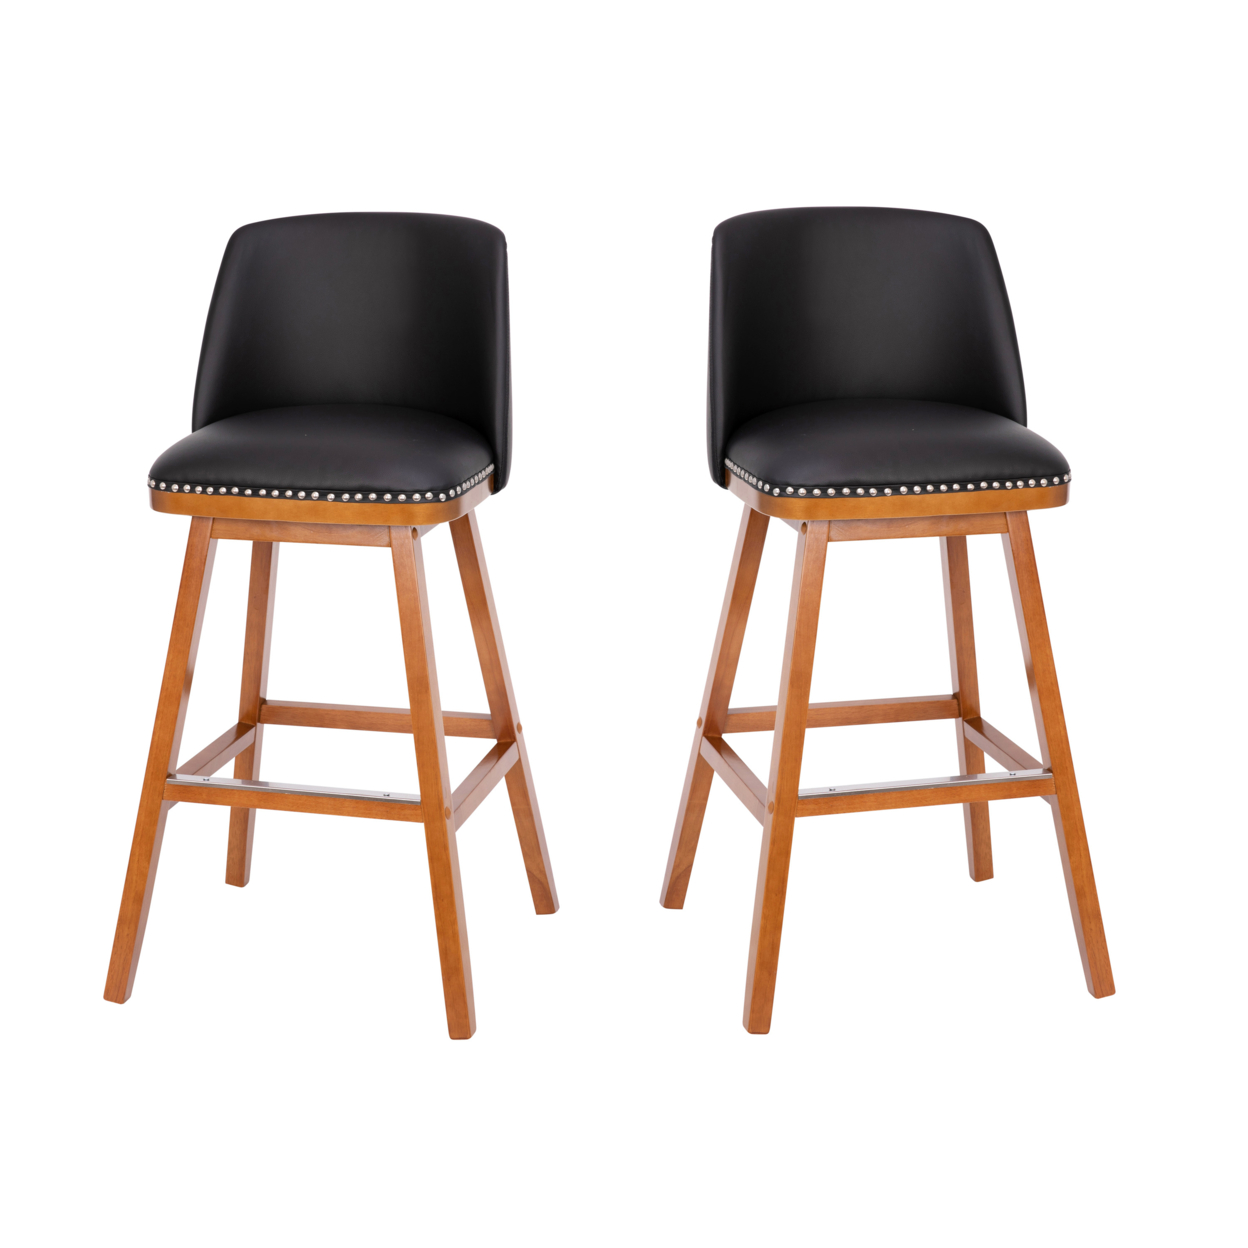 2 Piece 30 Inch Leather Stools, Curved Back, Seat, Nailhead Trims, Black